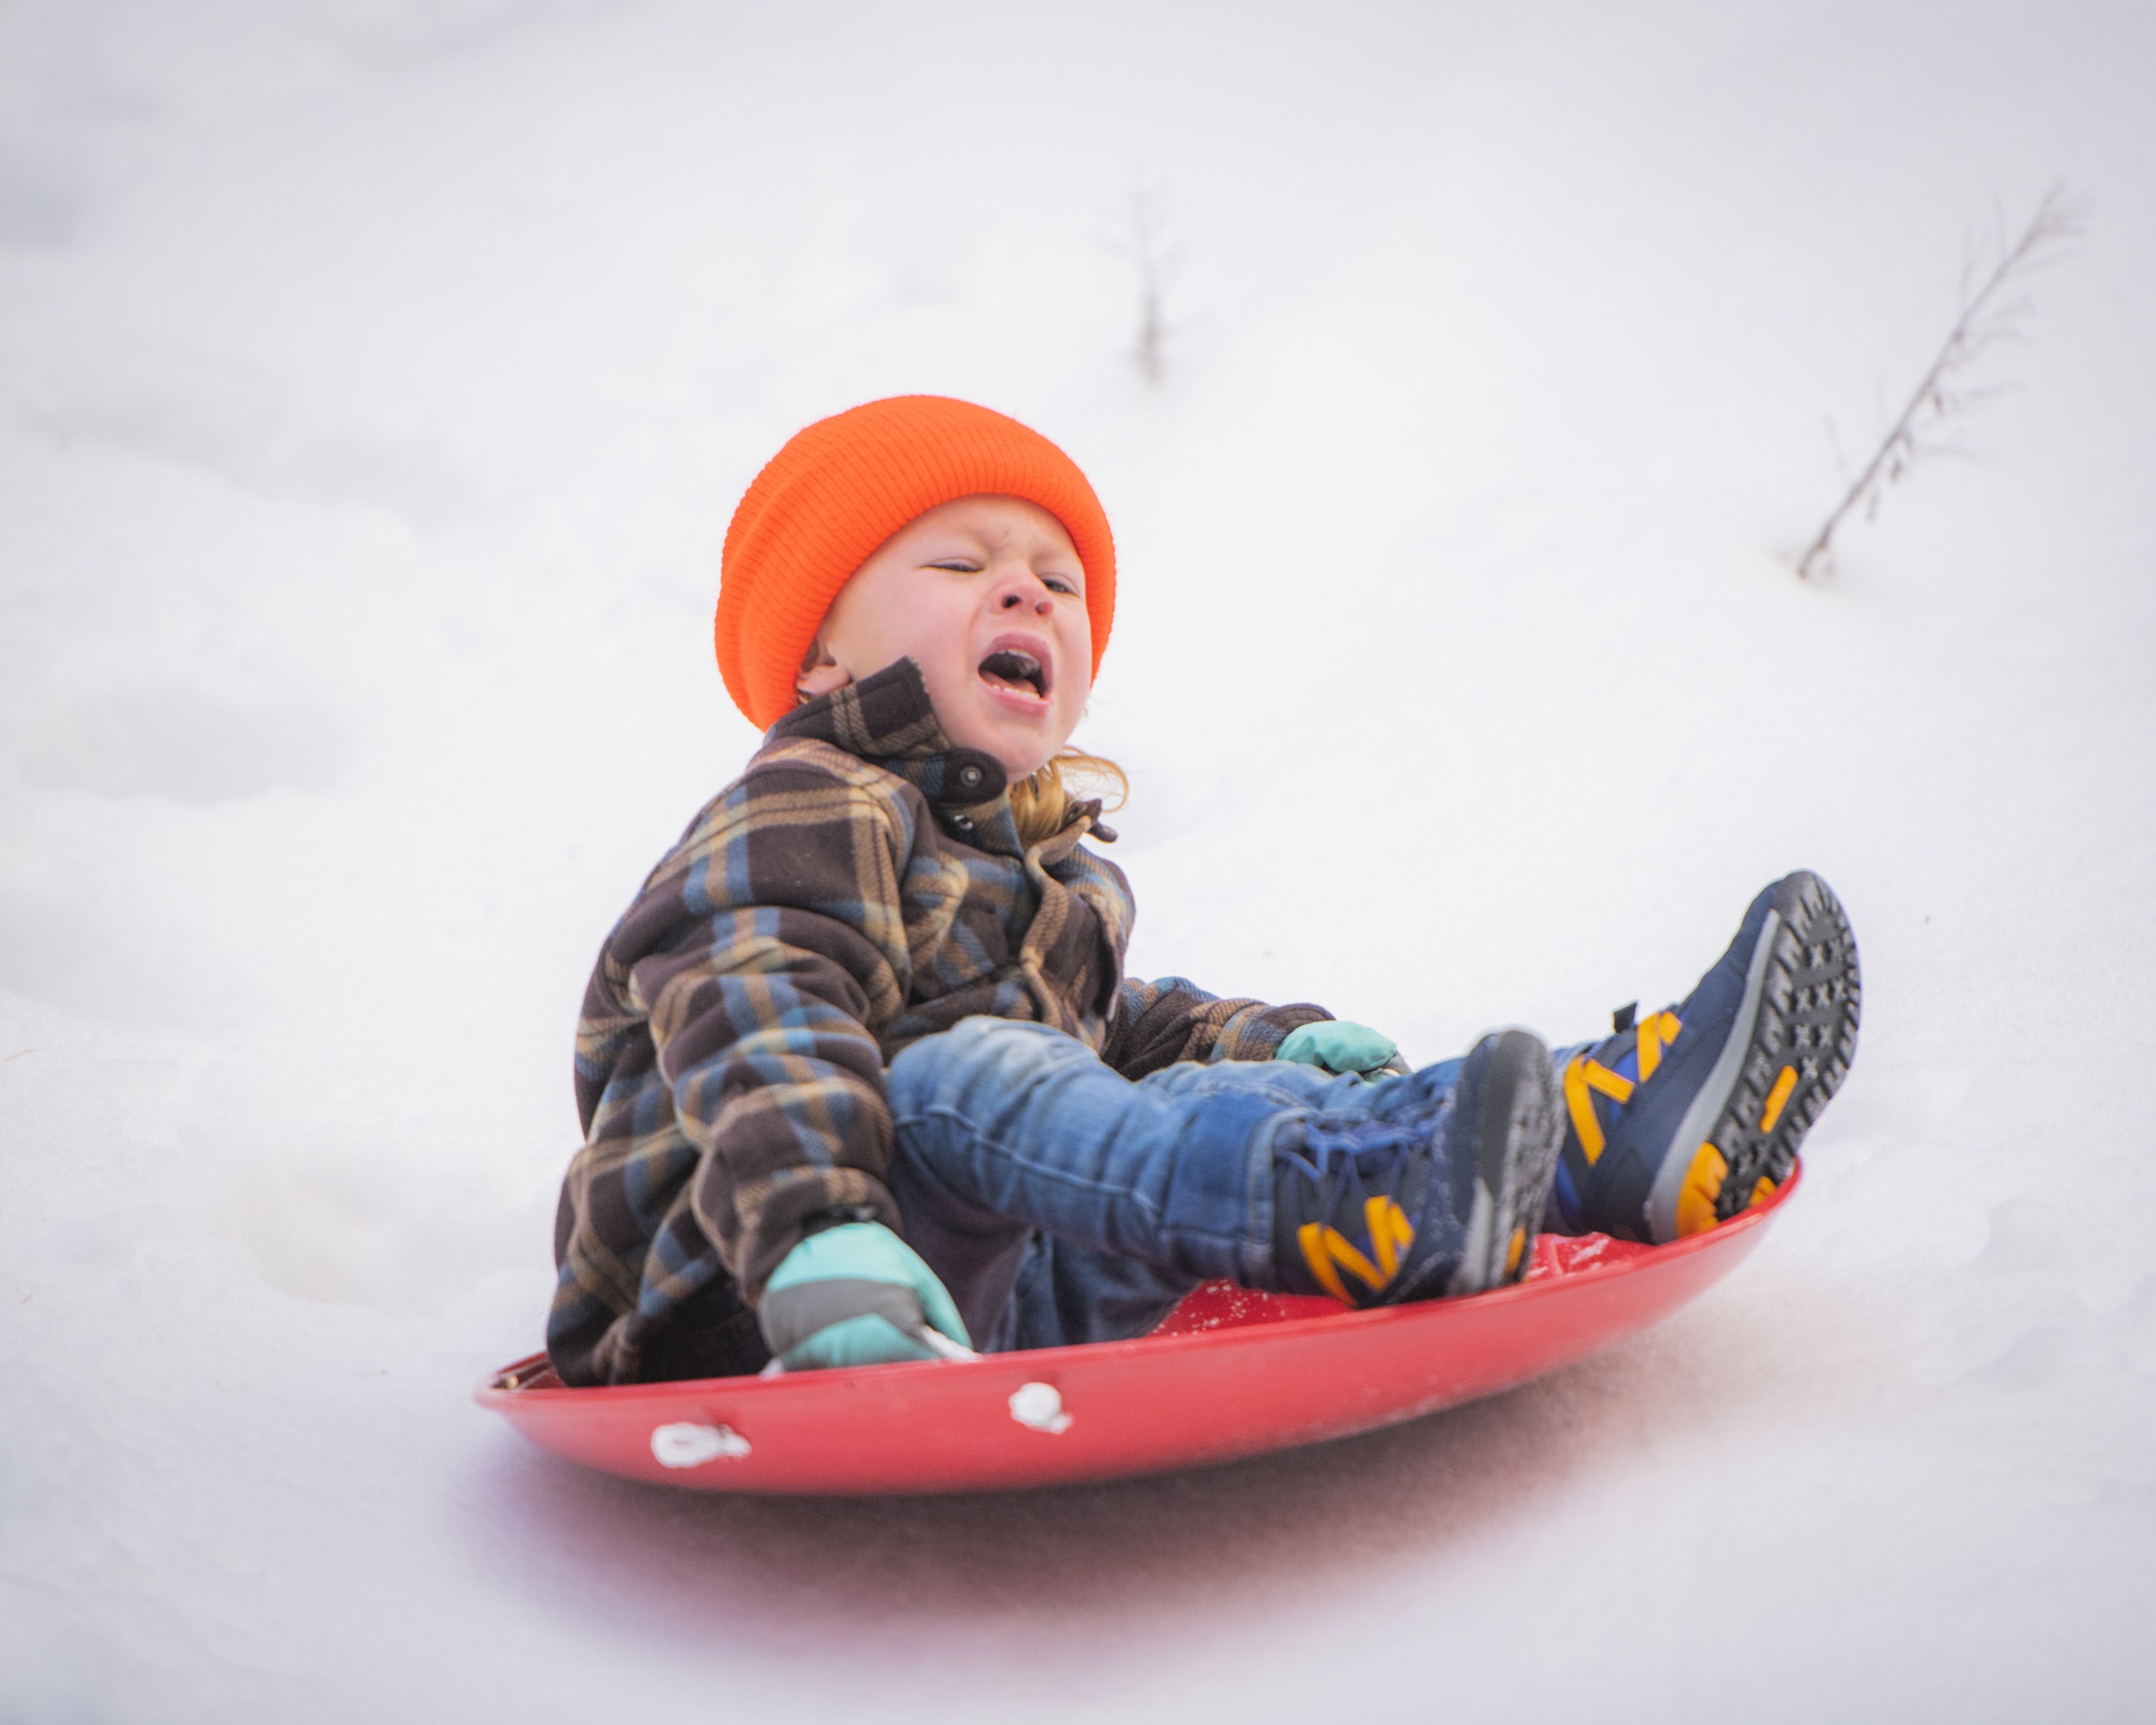 Crying baby on snow sled